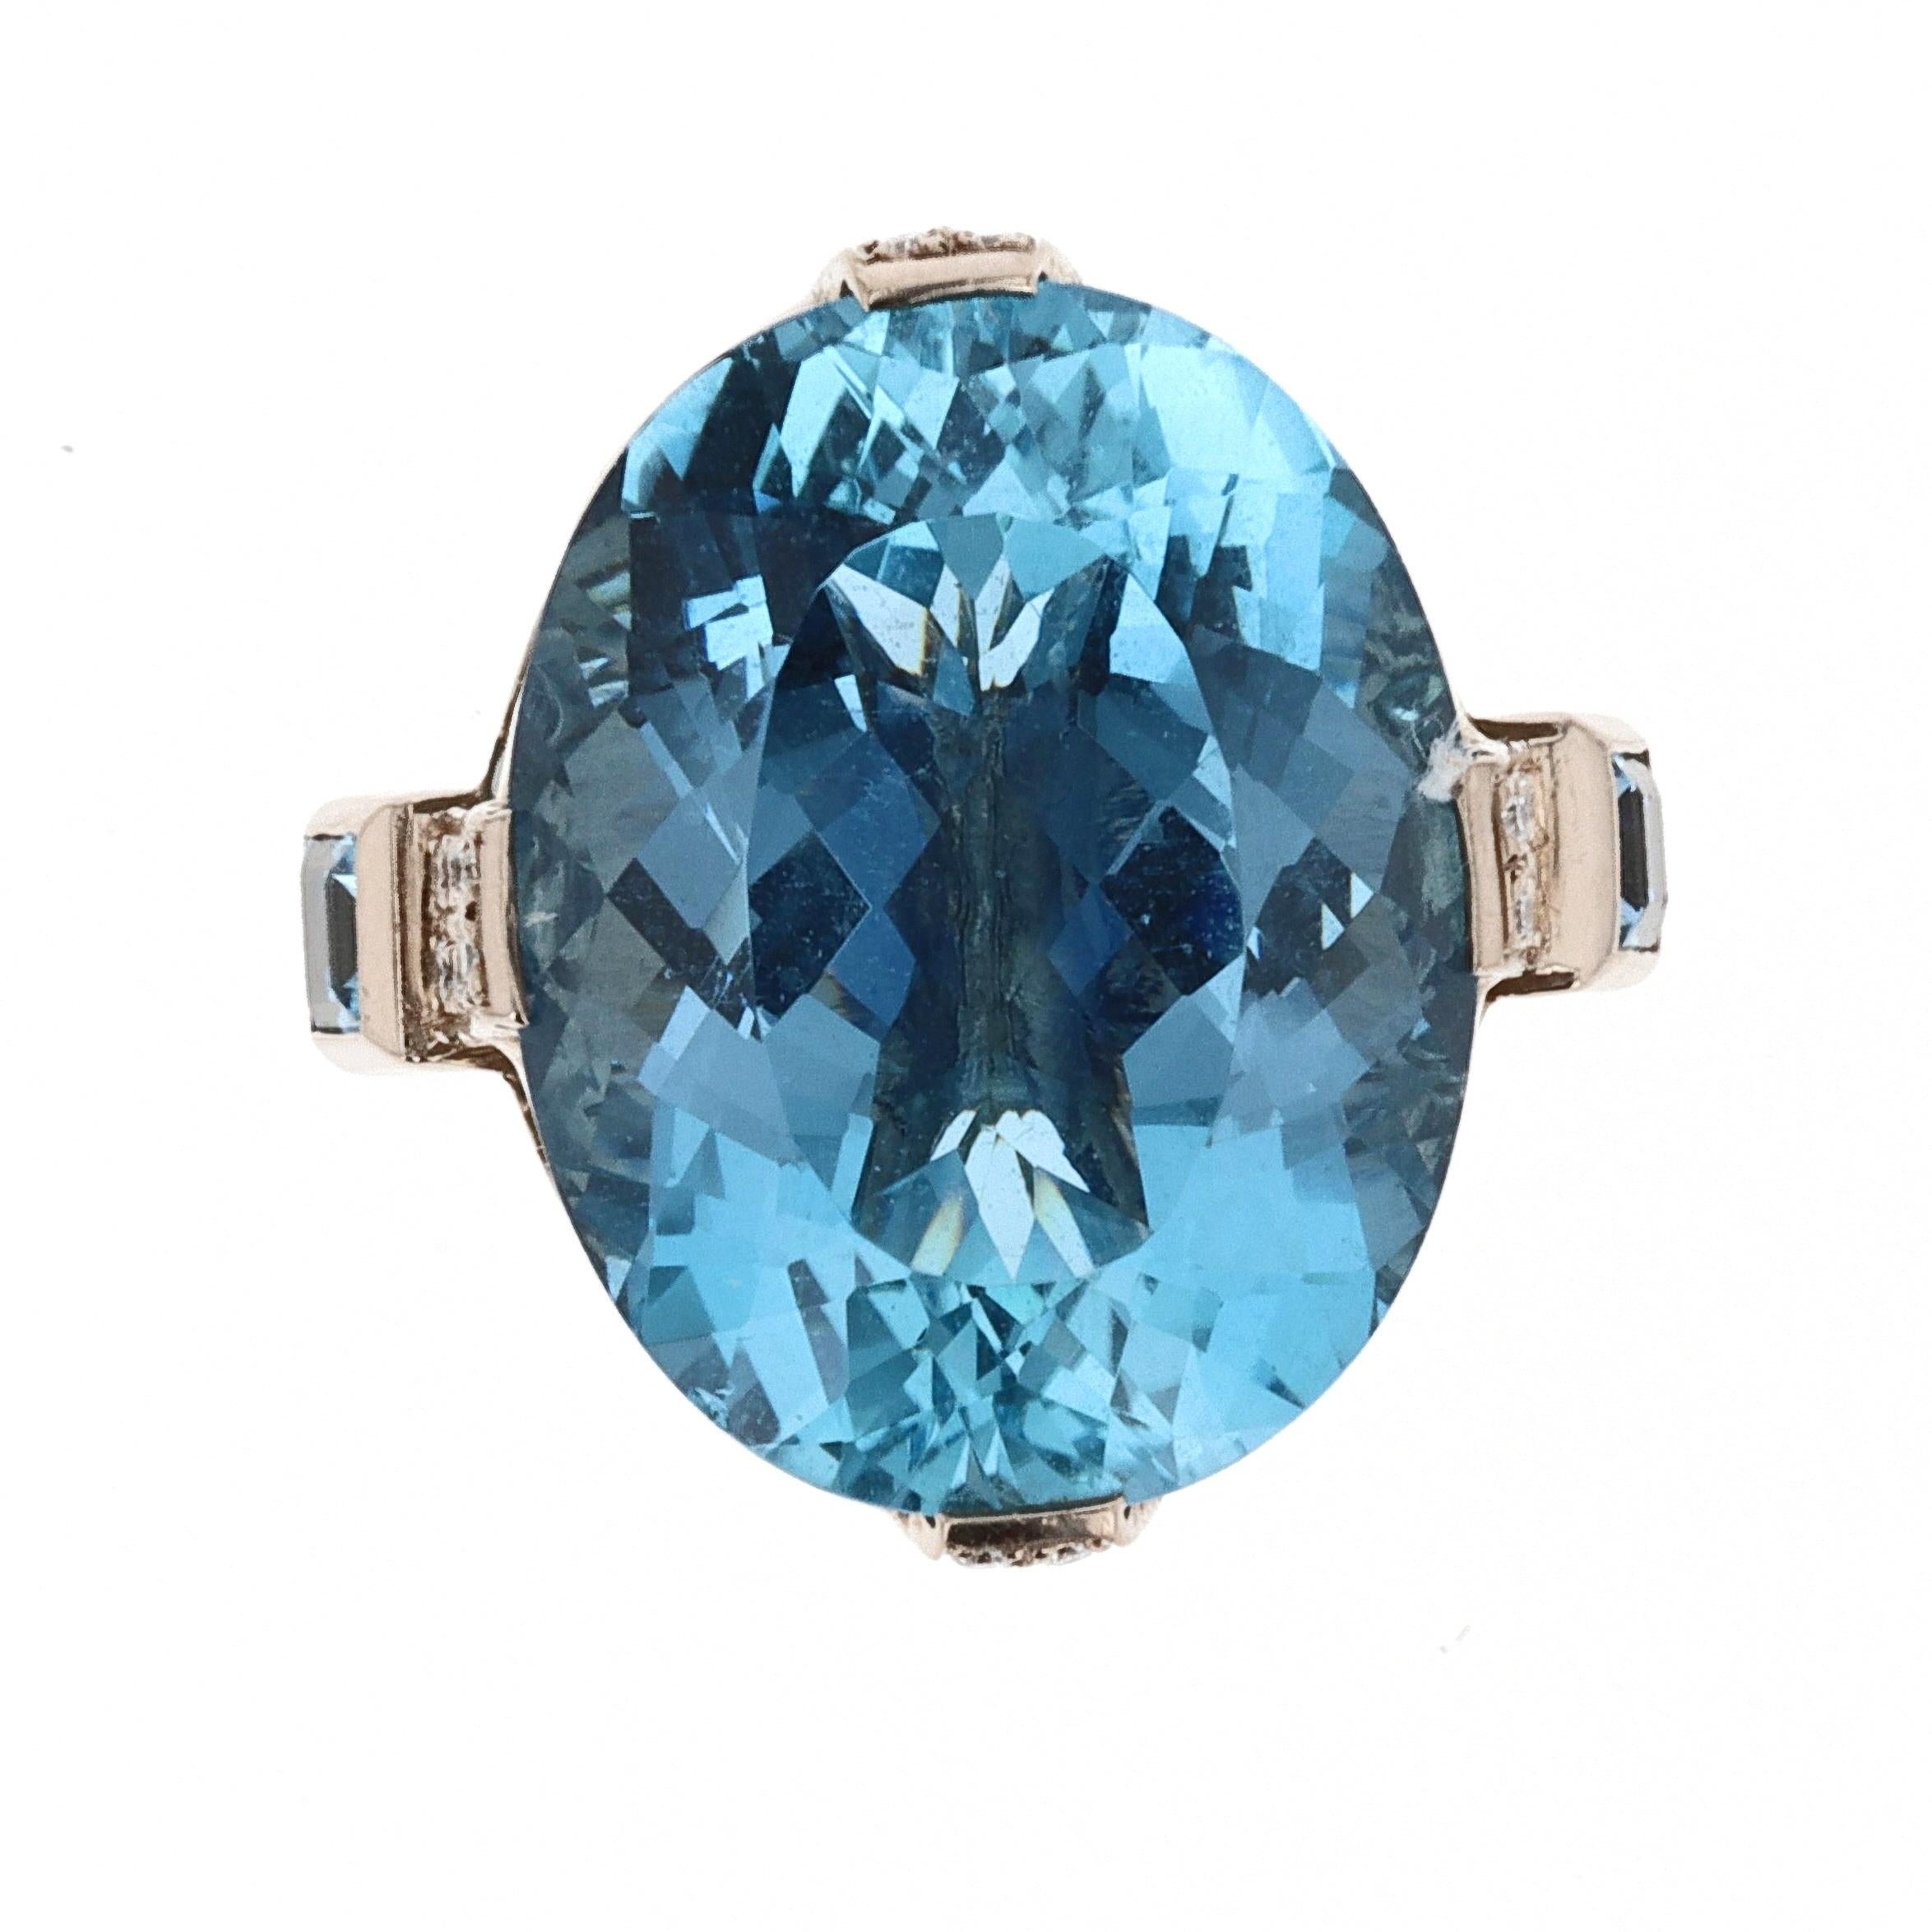 This 18k white gold cocktail ring is centered around a blue oval brilliant aquamarine of approximately 20cts.  
The sides of the ring are embellished with 42 round brilliant diamonds totaling approximately 0.45cts, 68 round brilliant aquamarines